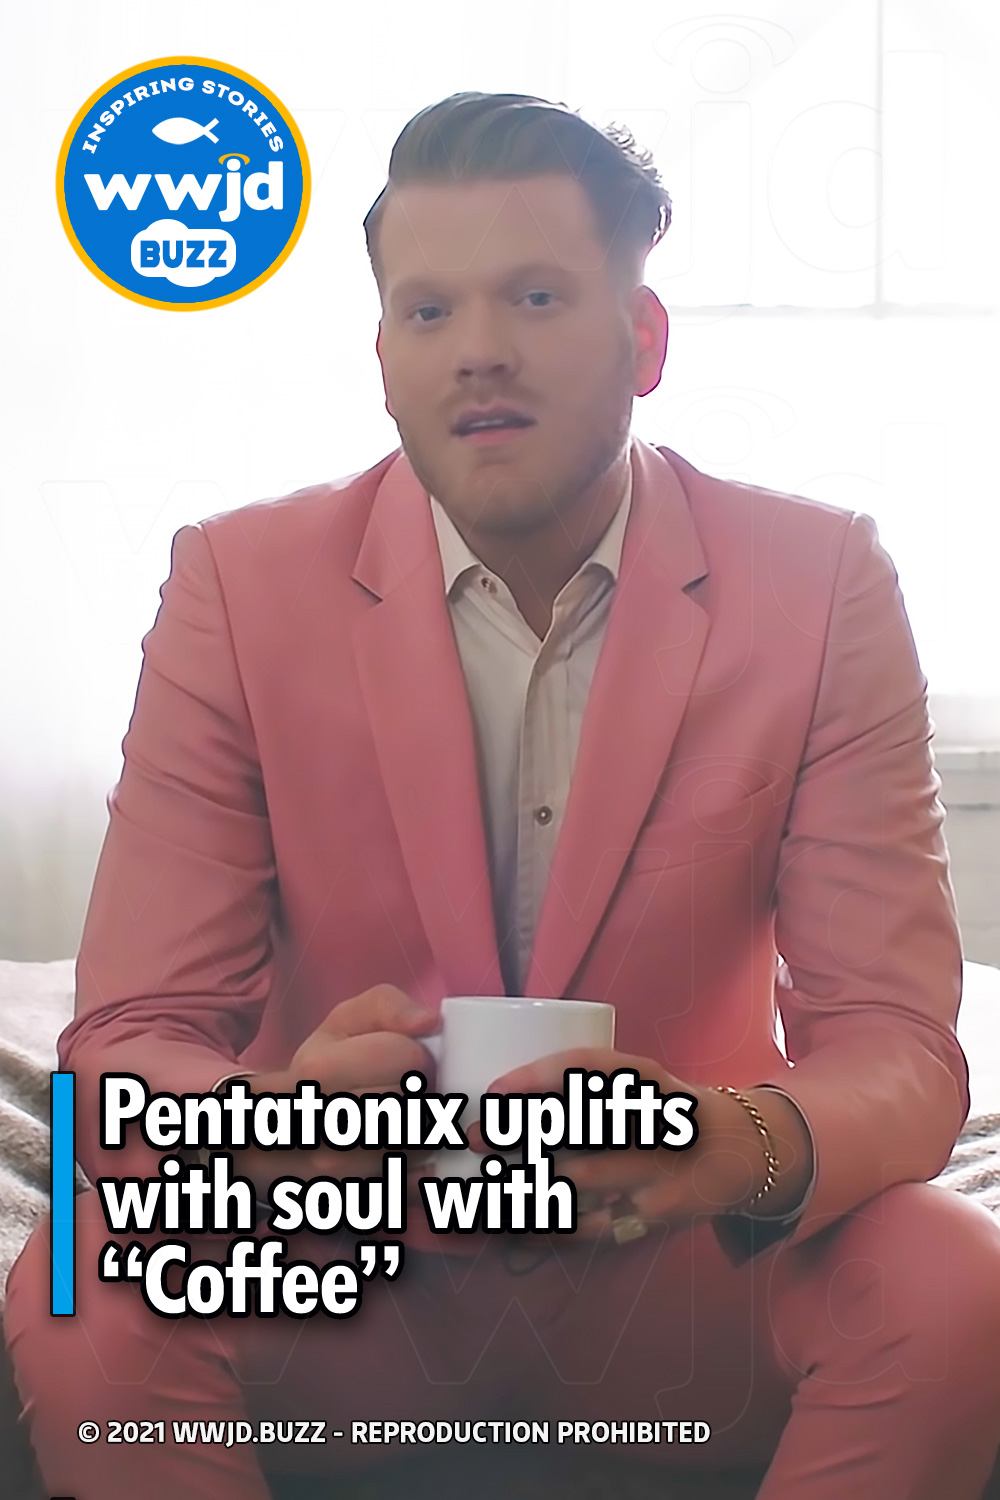 Pentatonix uplifts with soul with “Coffee”